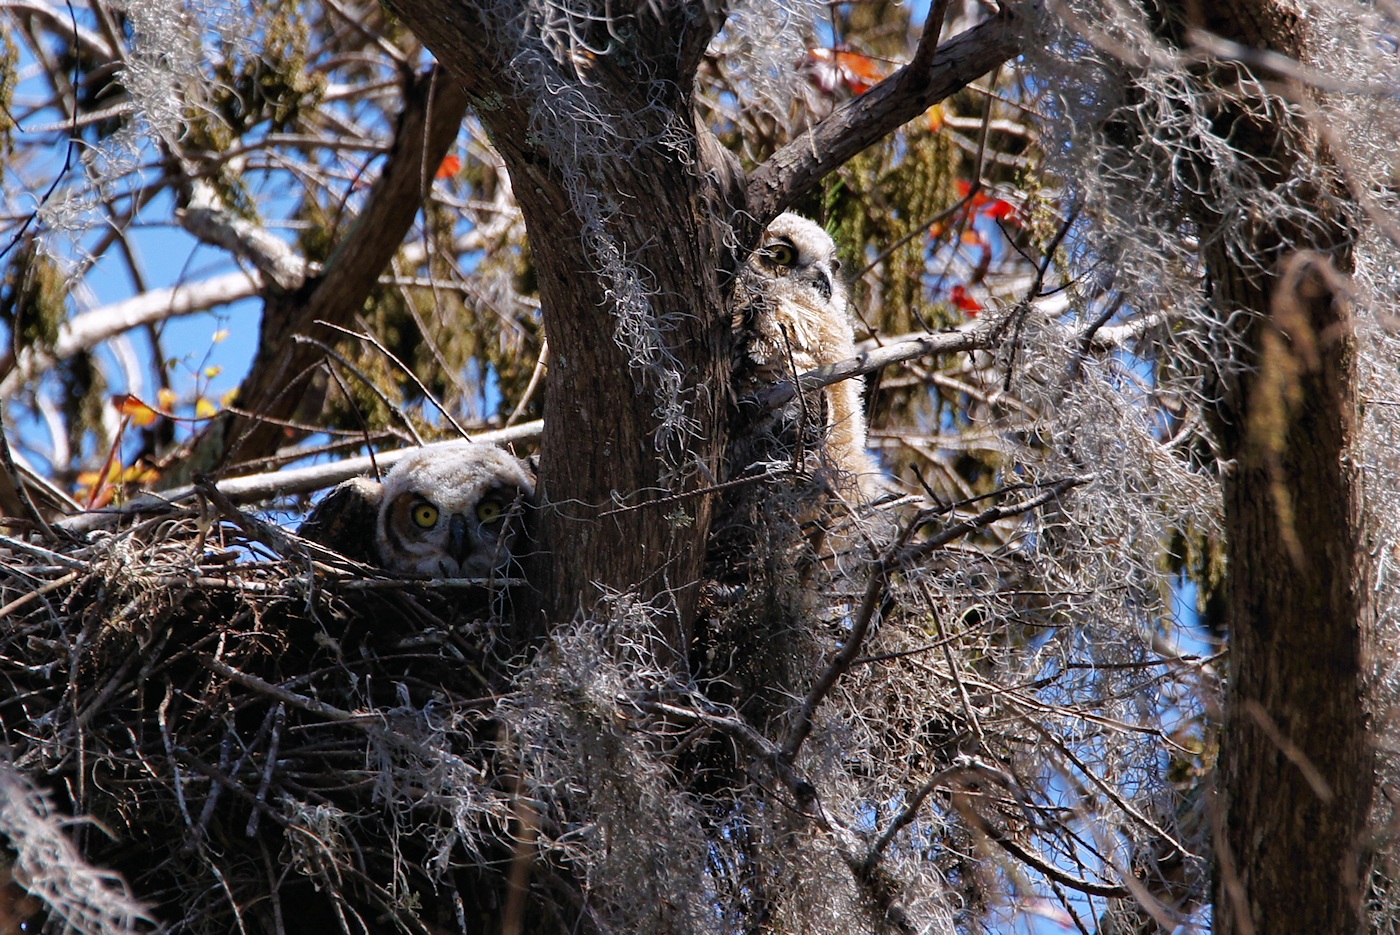 Great horned owlets in their nest